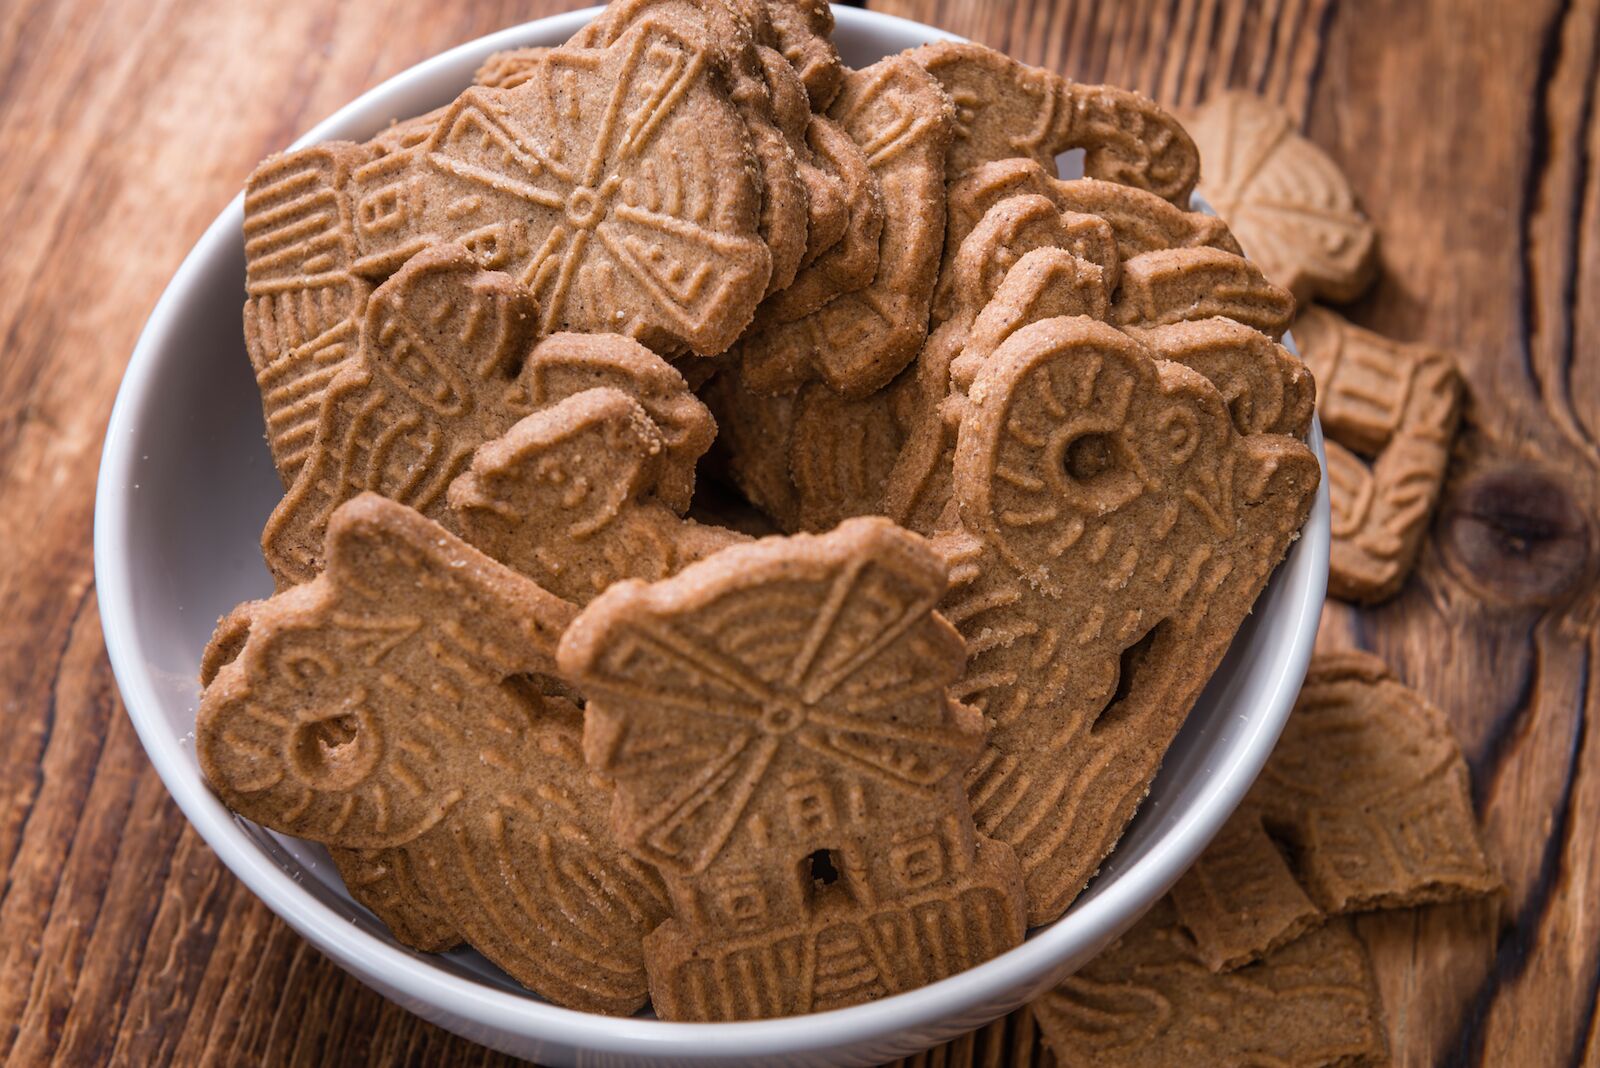 These spiced Spekulatius German Christmas cookies are in the shape of windmills